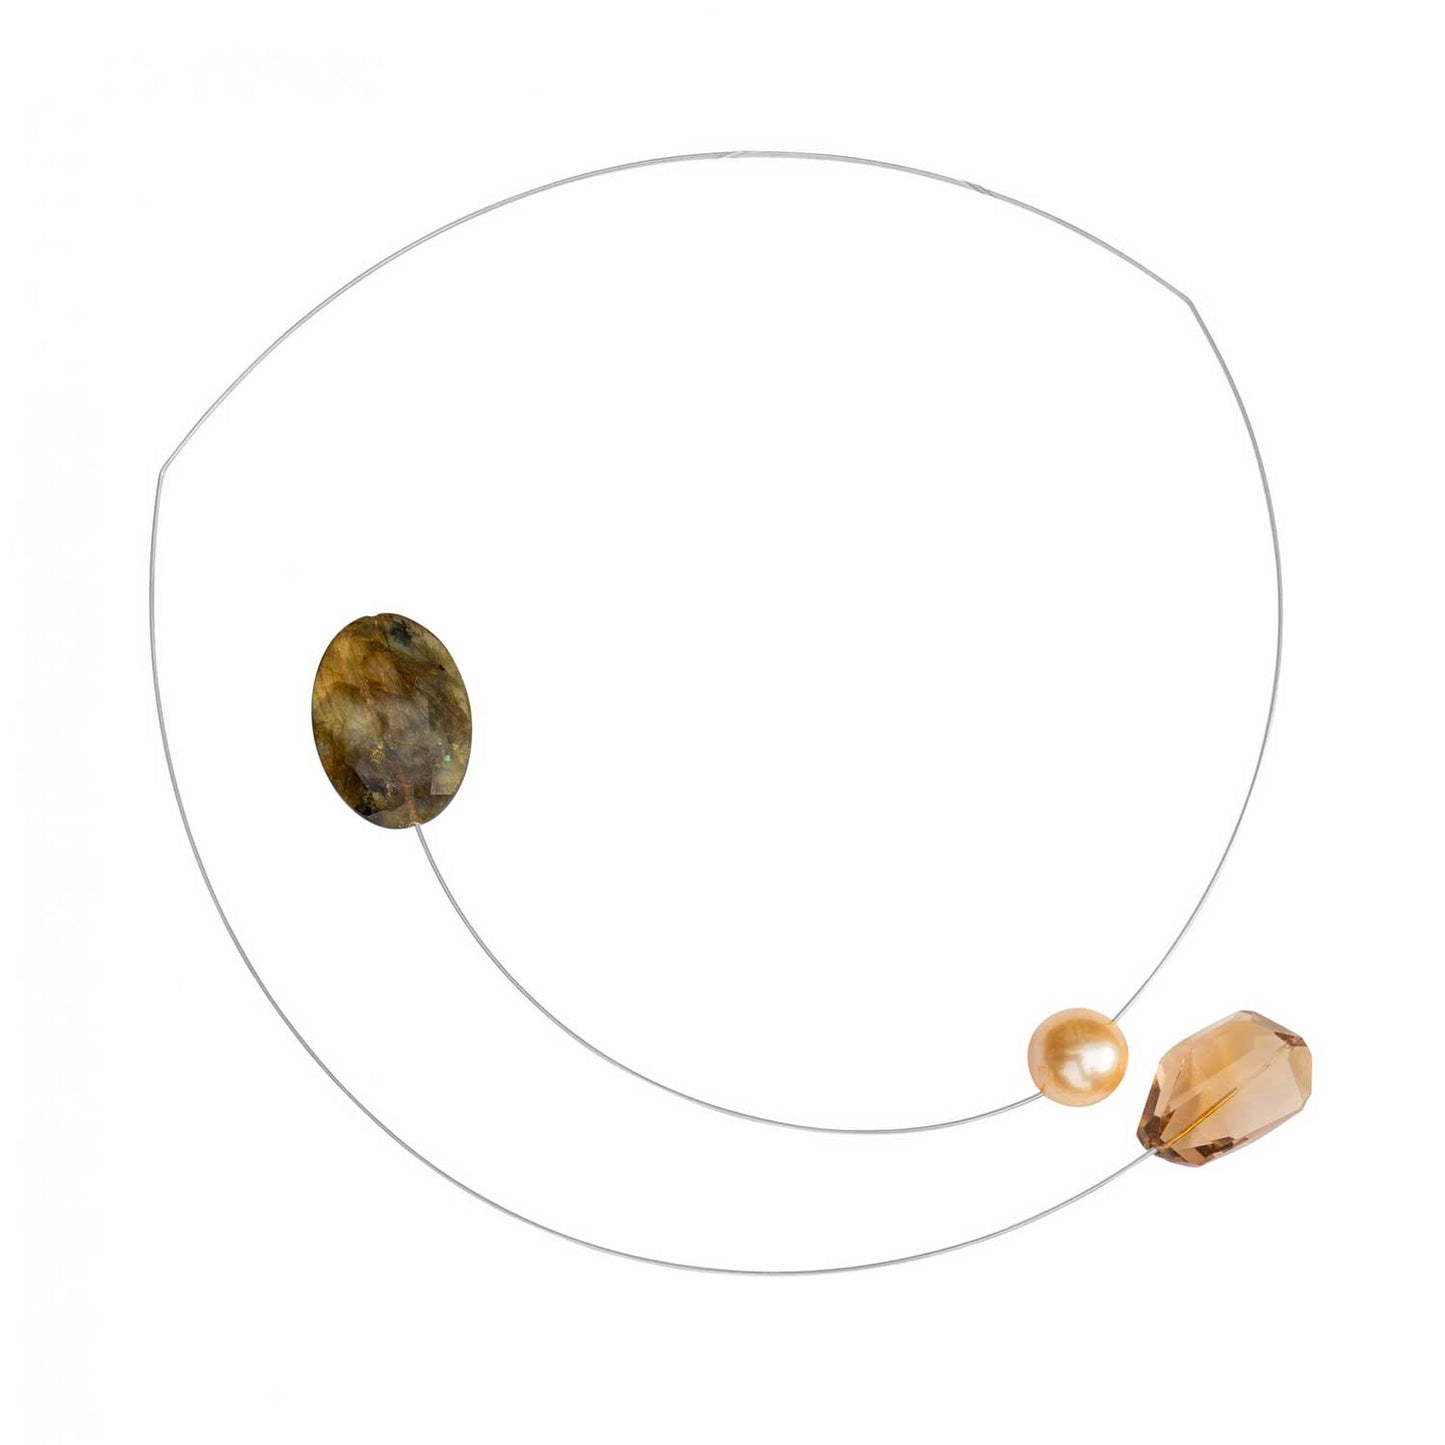 Asymmetric Necklace with Gemstone and Freshwater Pearl options